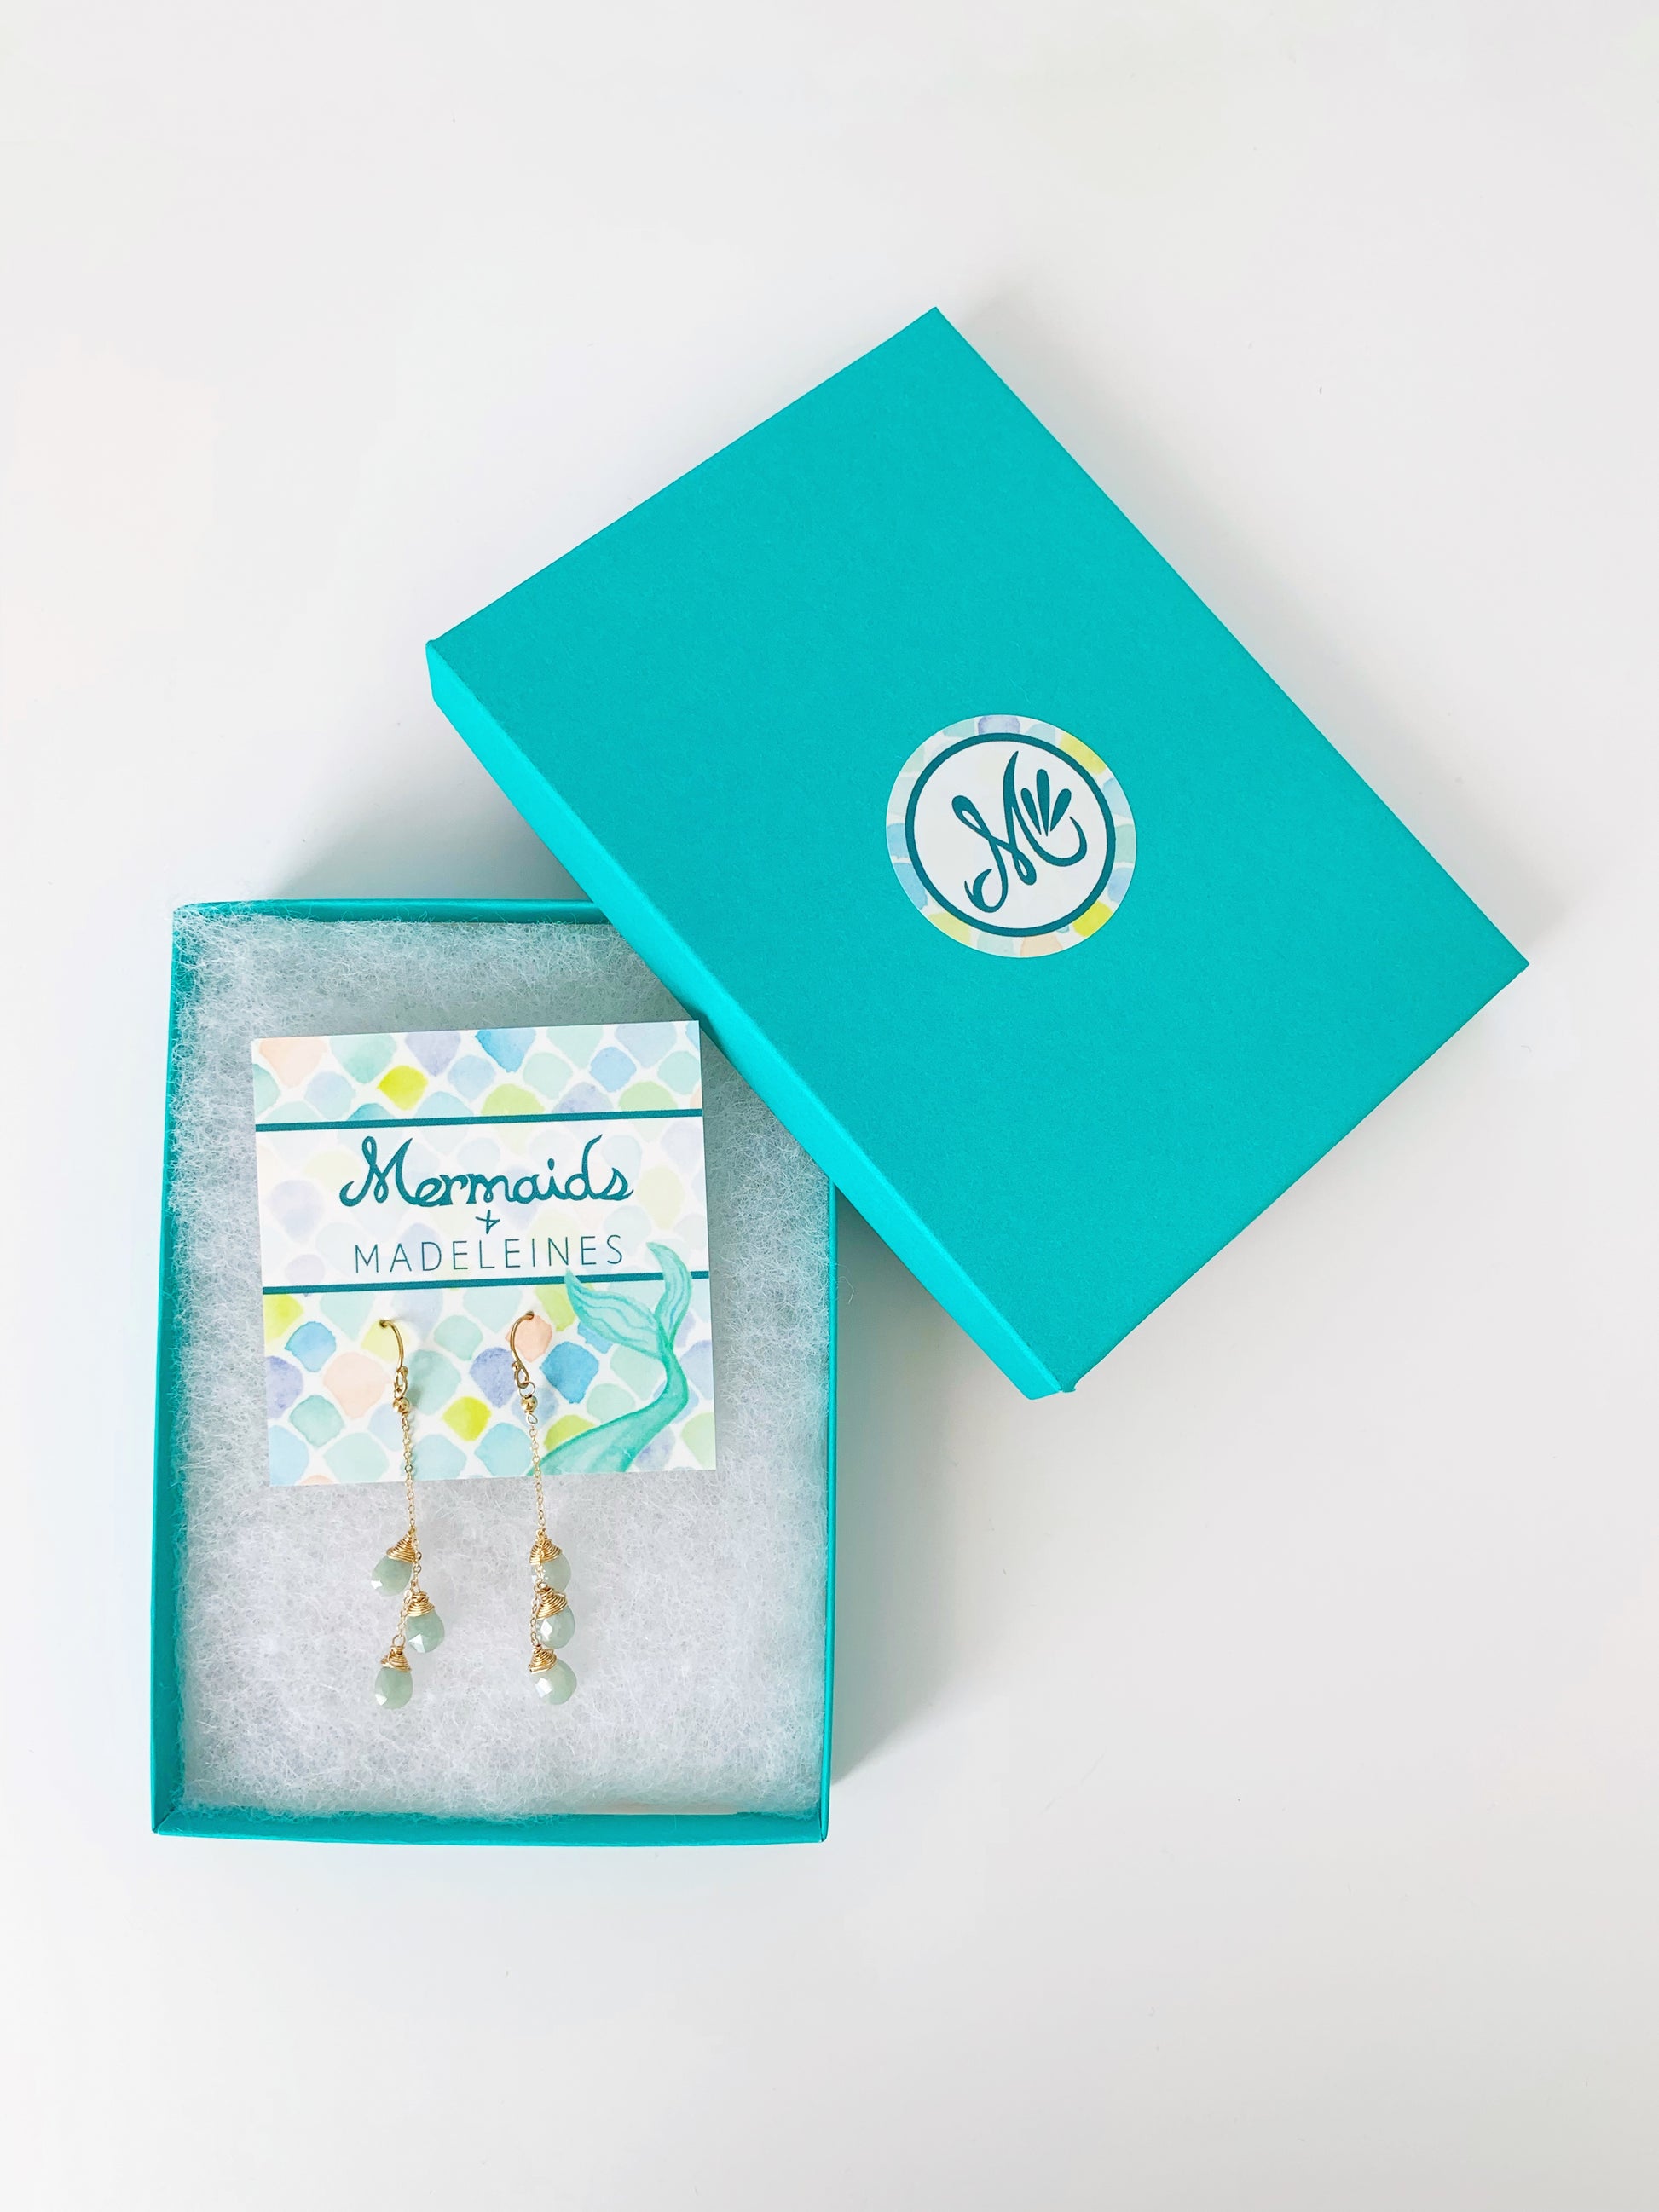 A picture of the 14k gold filled raindrop aquamarine earrings in a teal gift box on a white surface